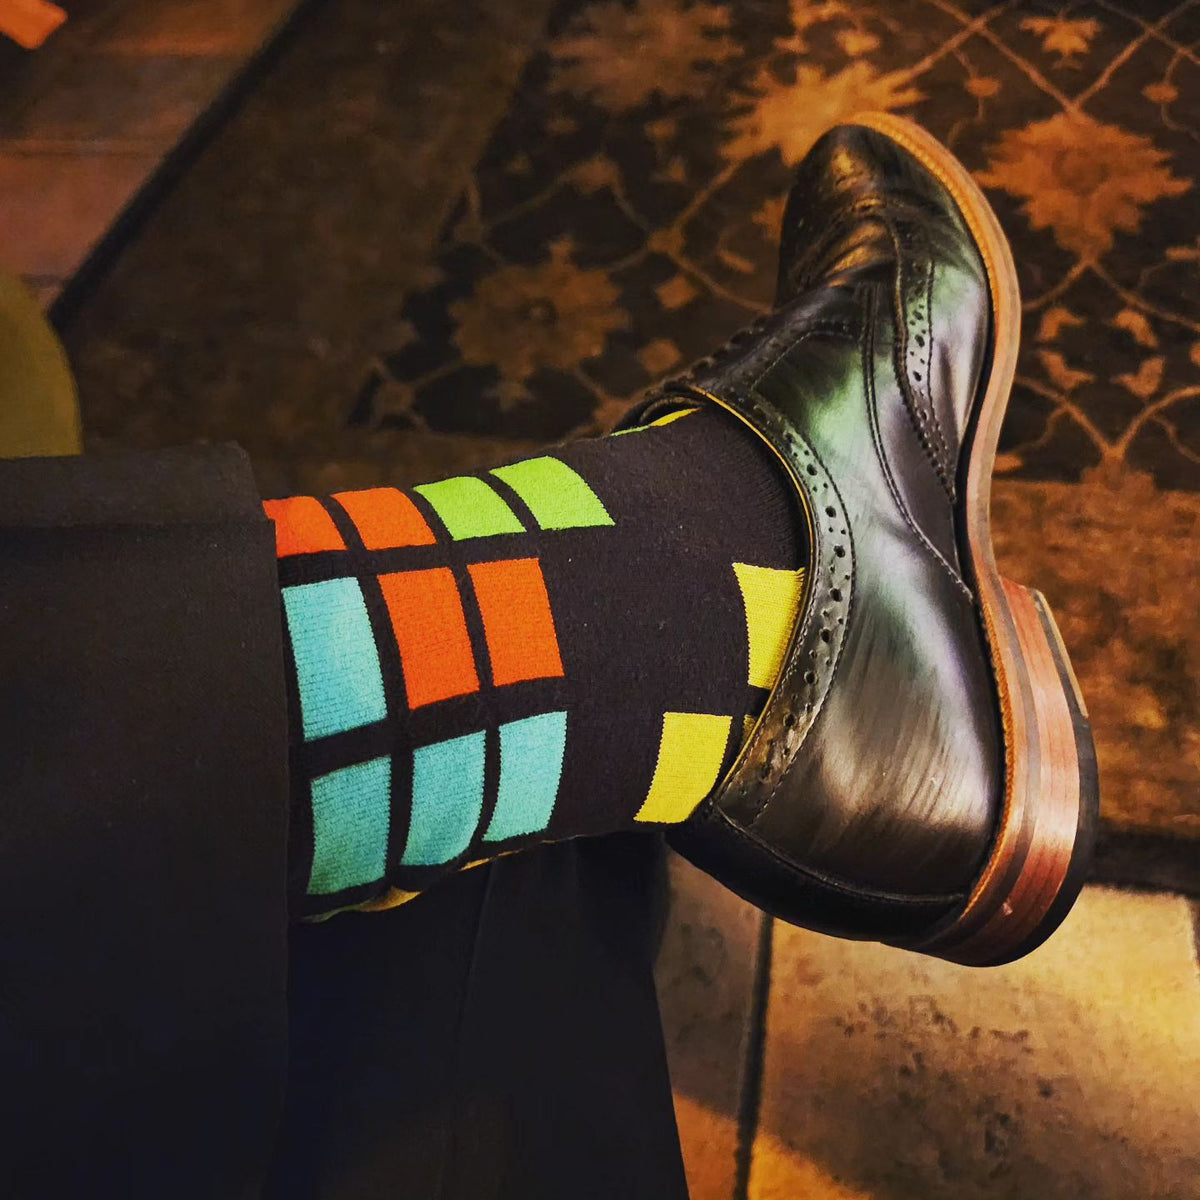 Find Out Why Active Professionals Will Love These Socks You Can